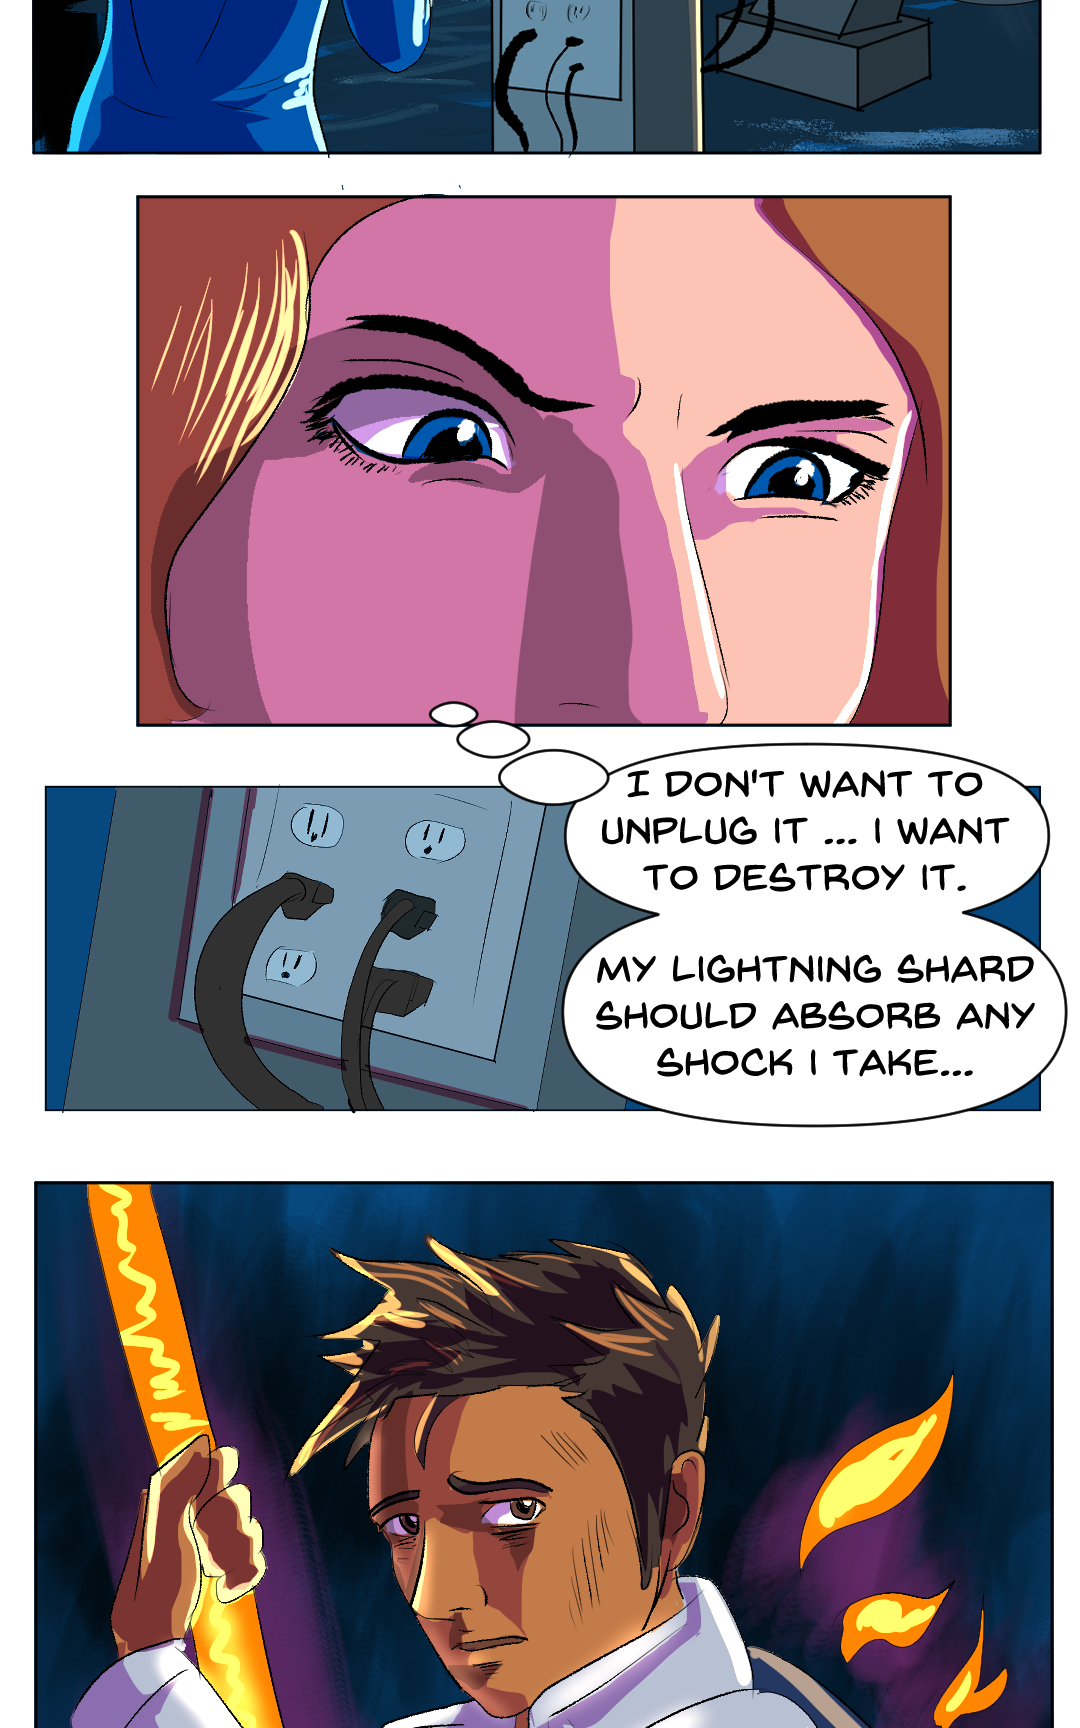 Charged up panel 4